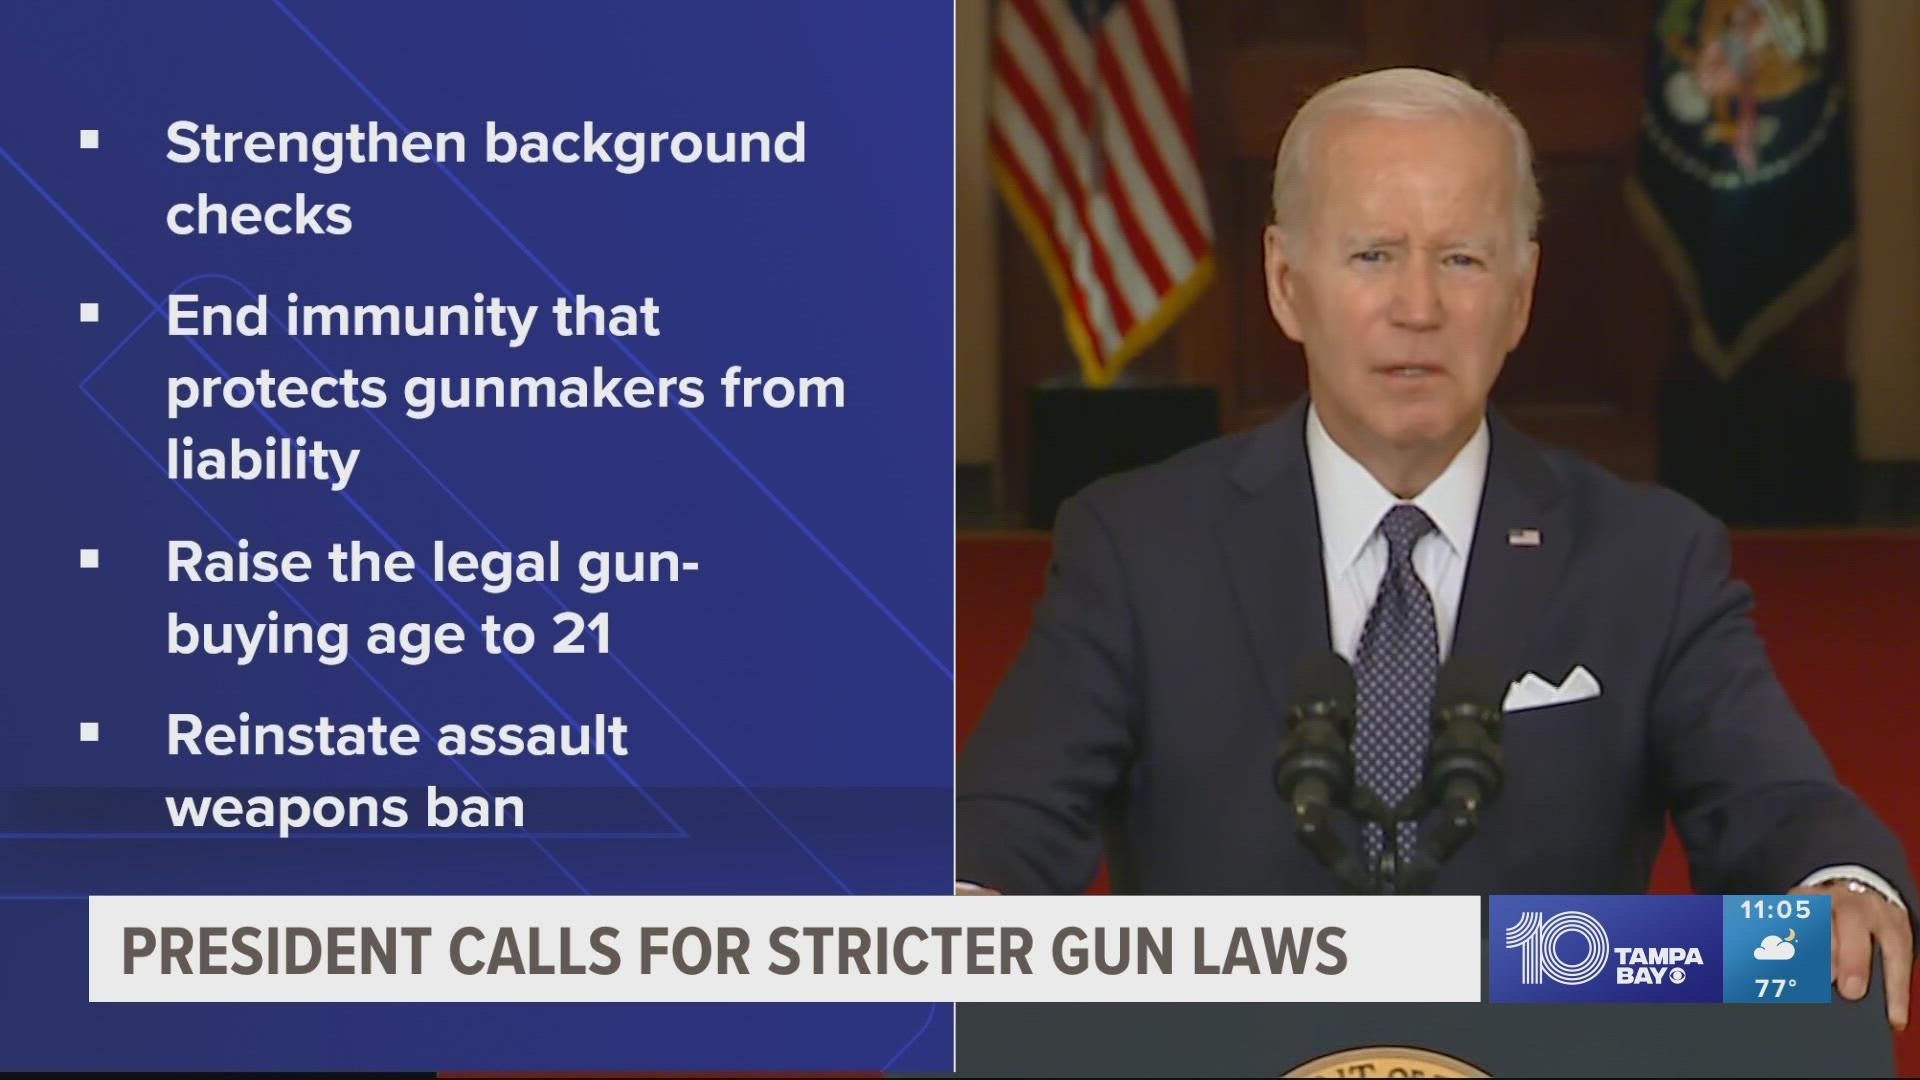 If legislators fail to act, Biden warned, voters should use their “outrage” to turn gun control into a central issue in November’s midterm elections.